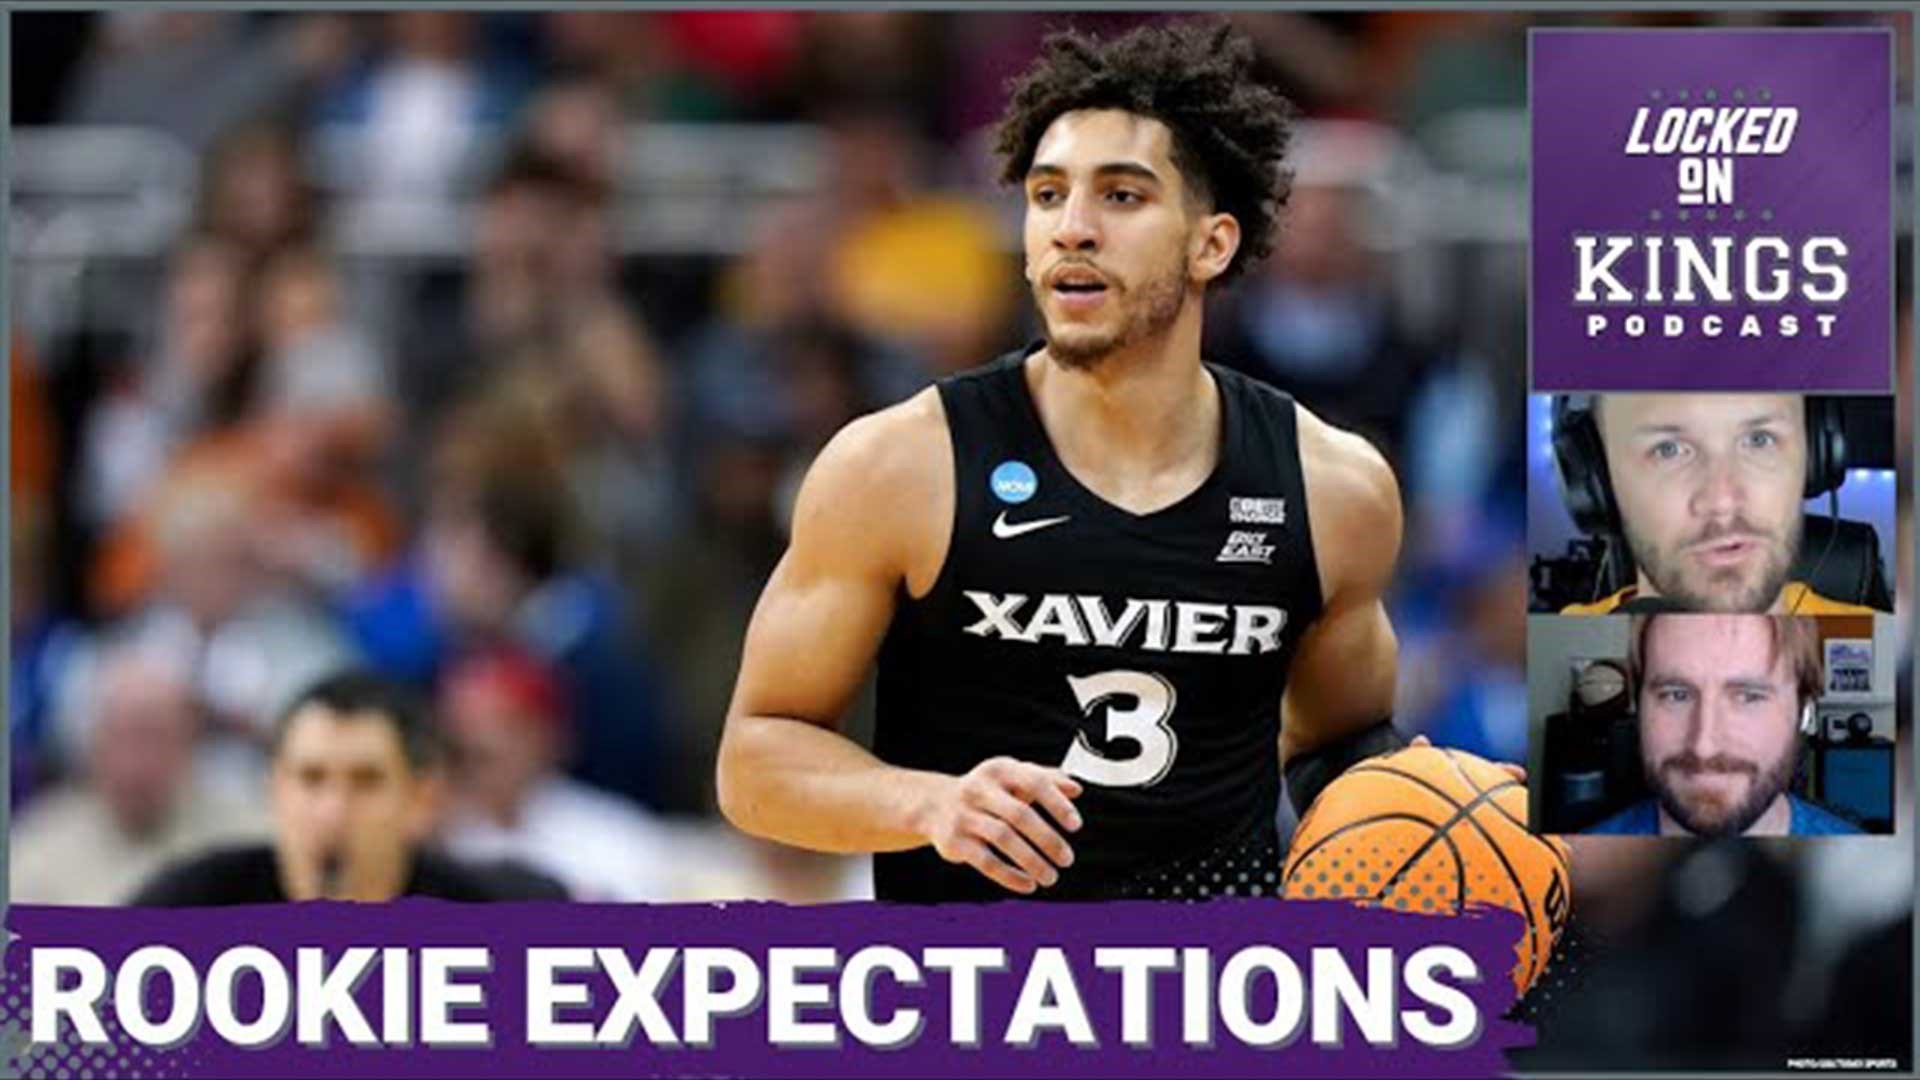 Matt George is joined by Bryant West of The Kings Herald to discuss Sacramento Kings rookie Colby Jones.